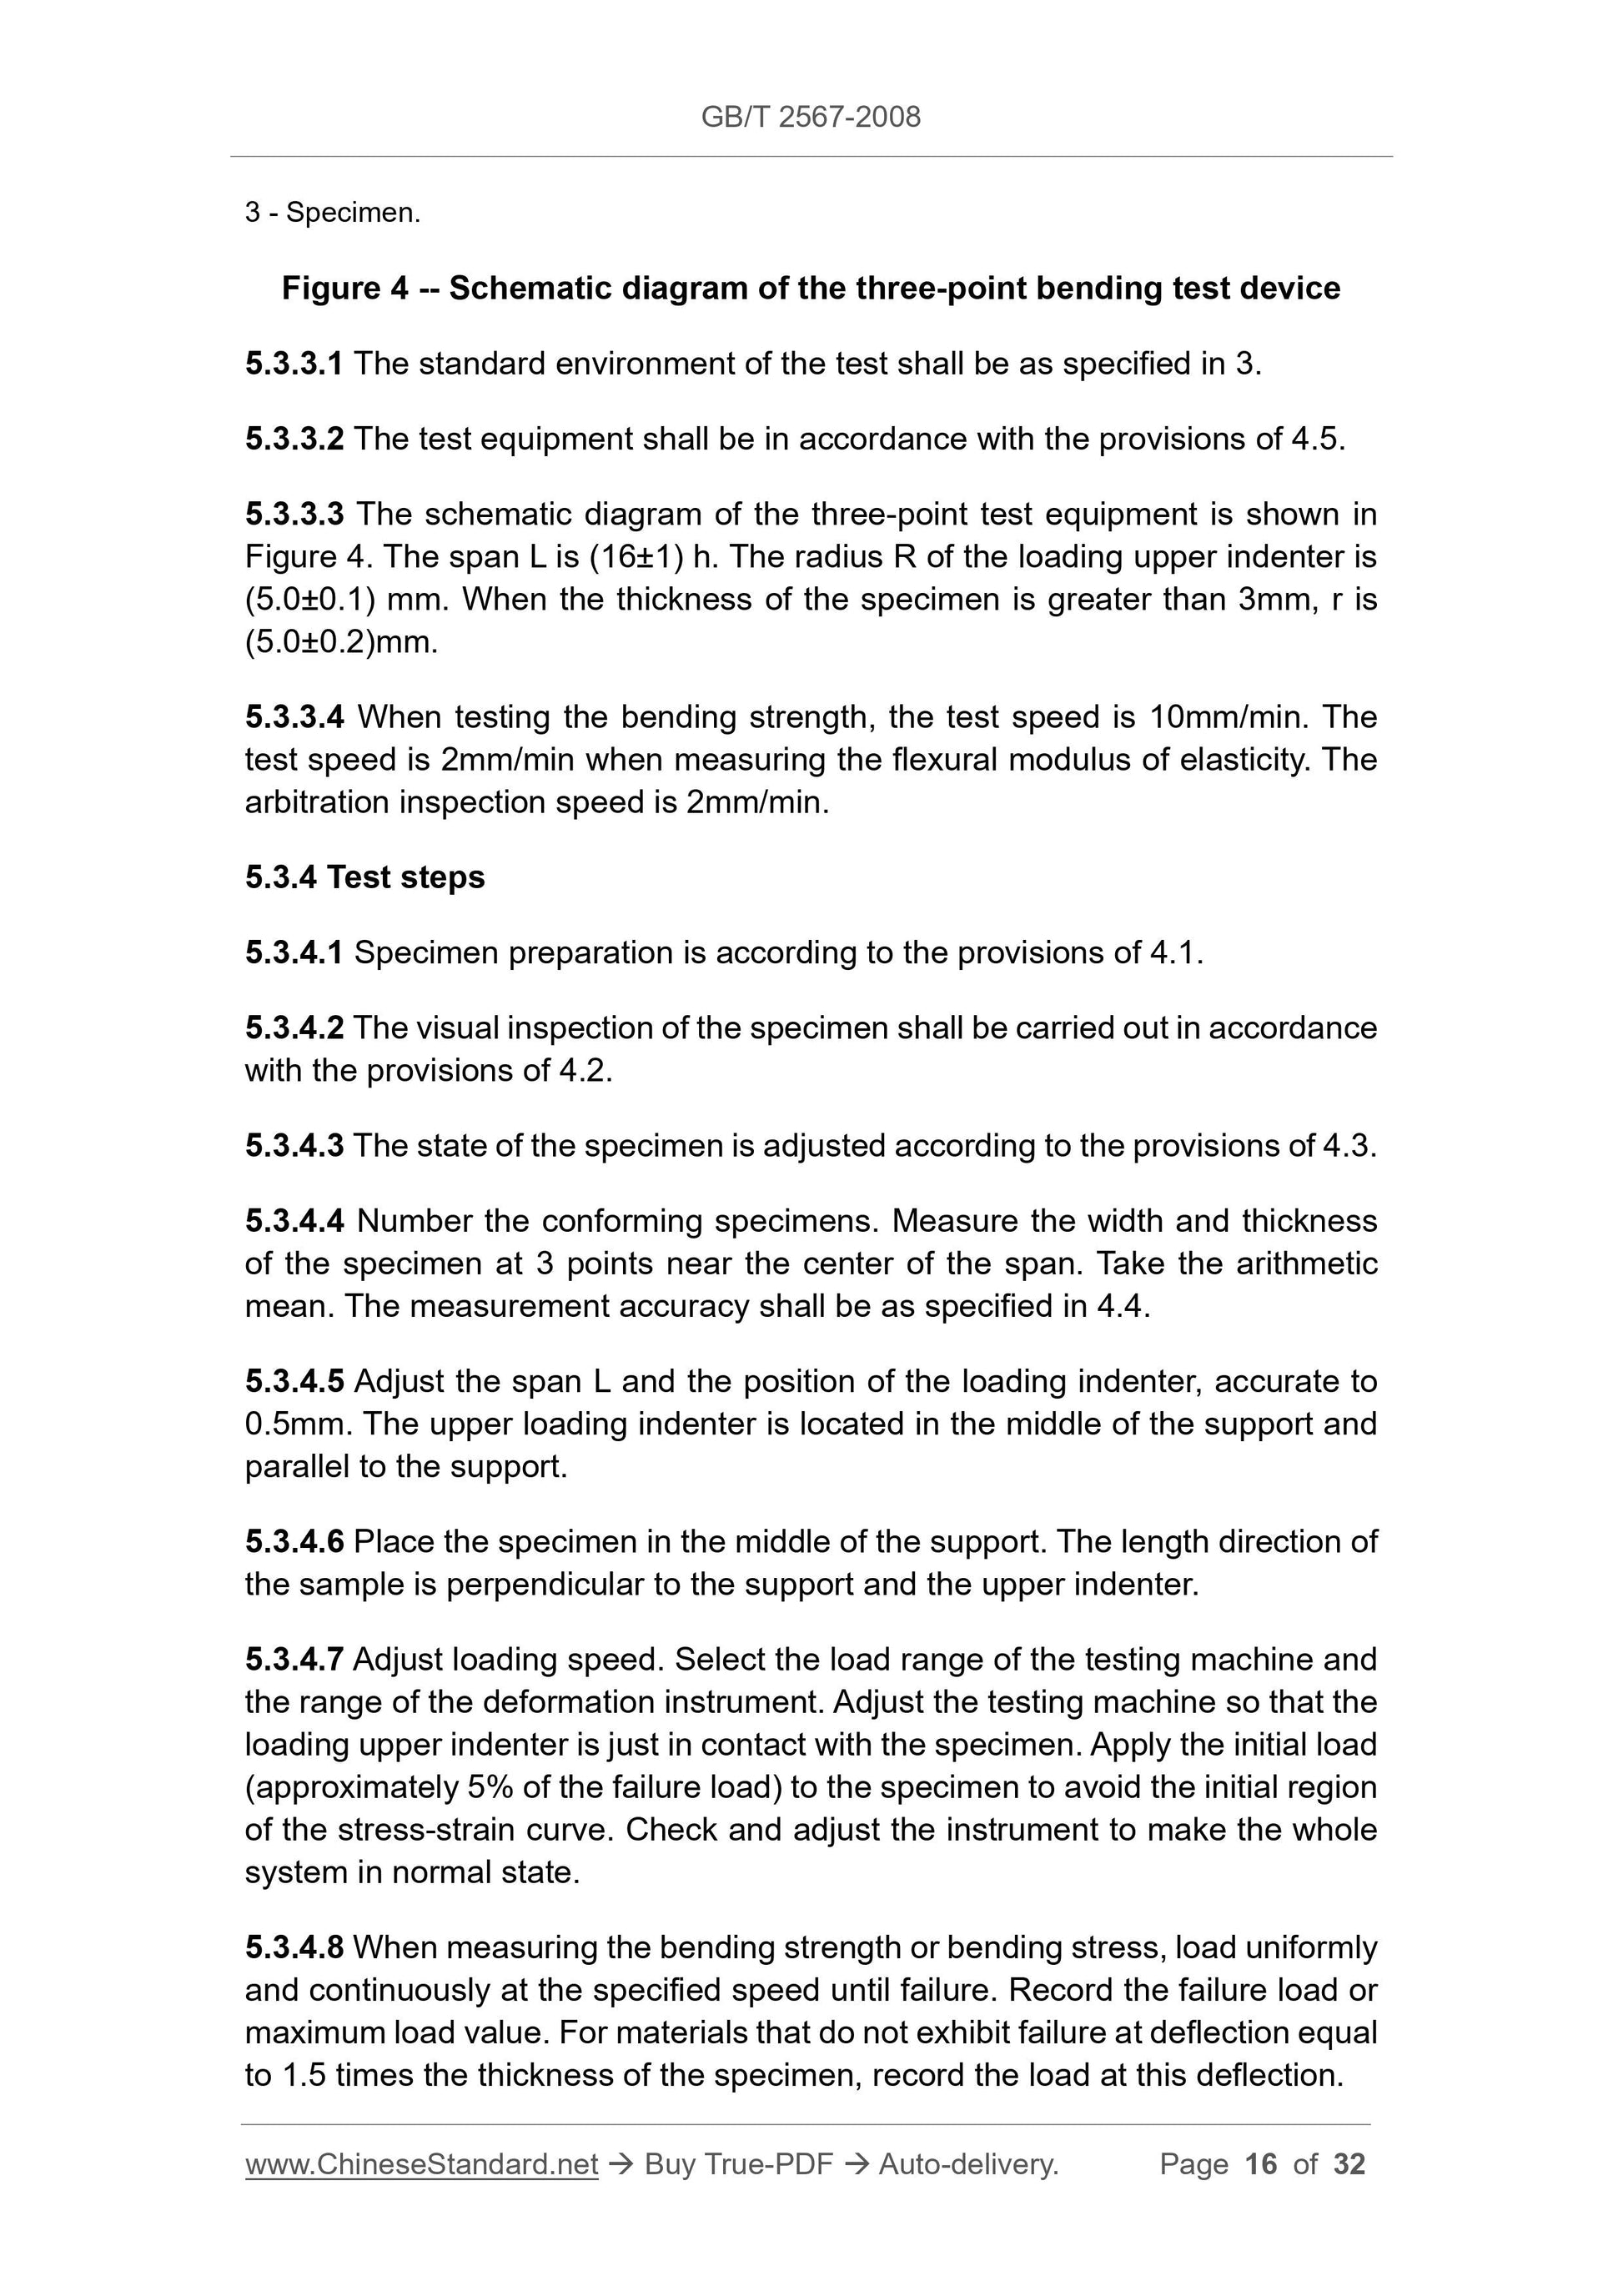 GB/T 2567-2008 Page 7